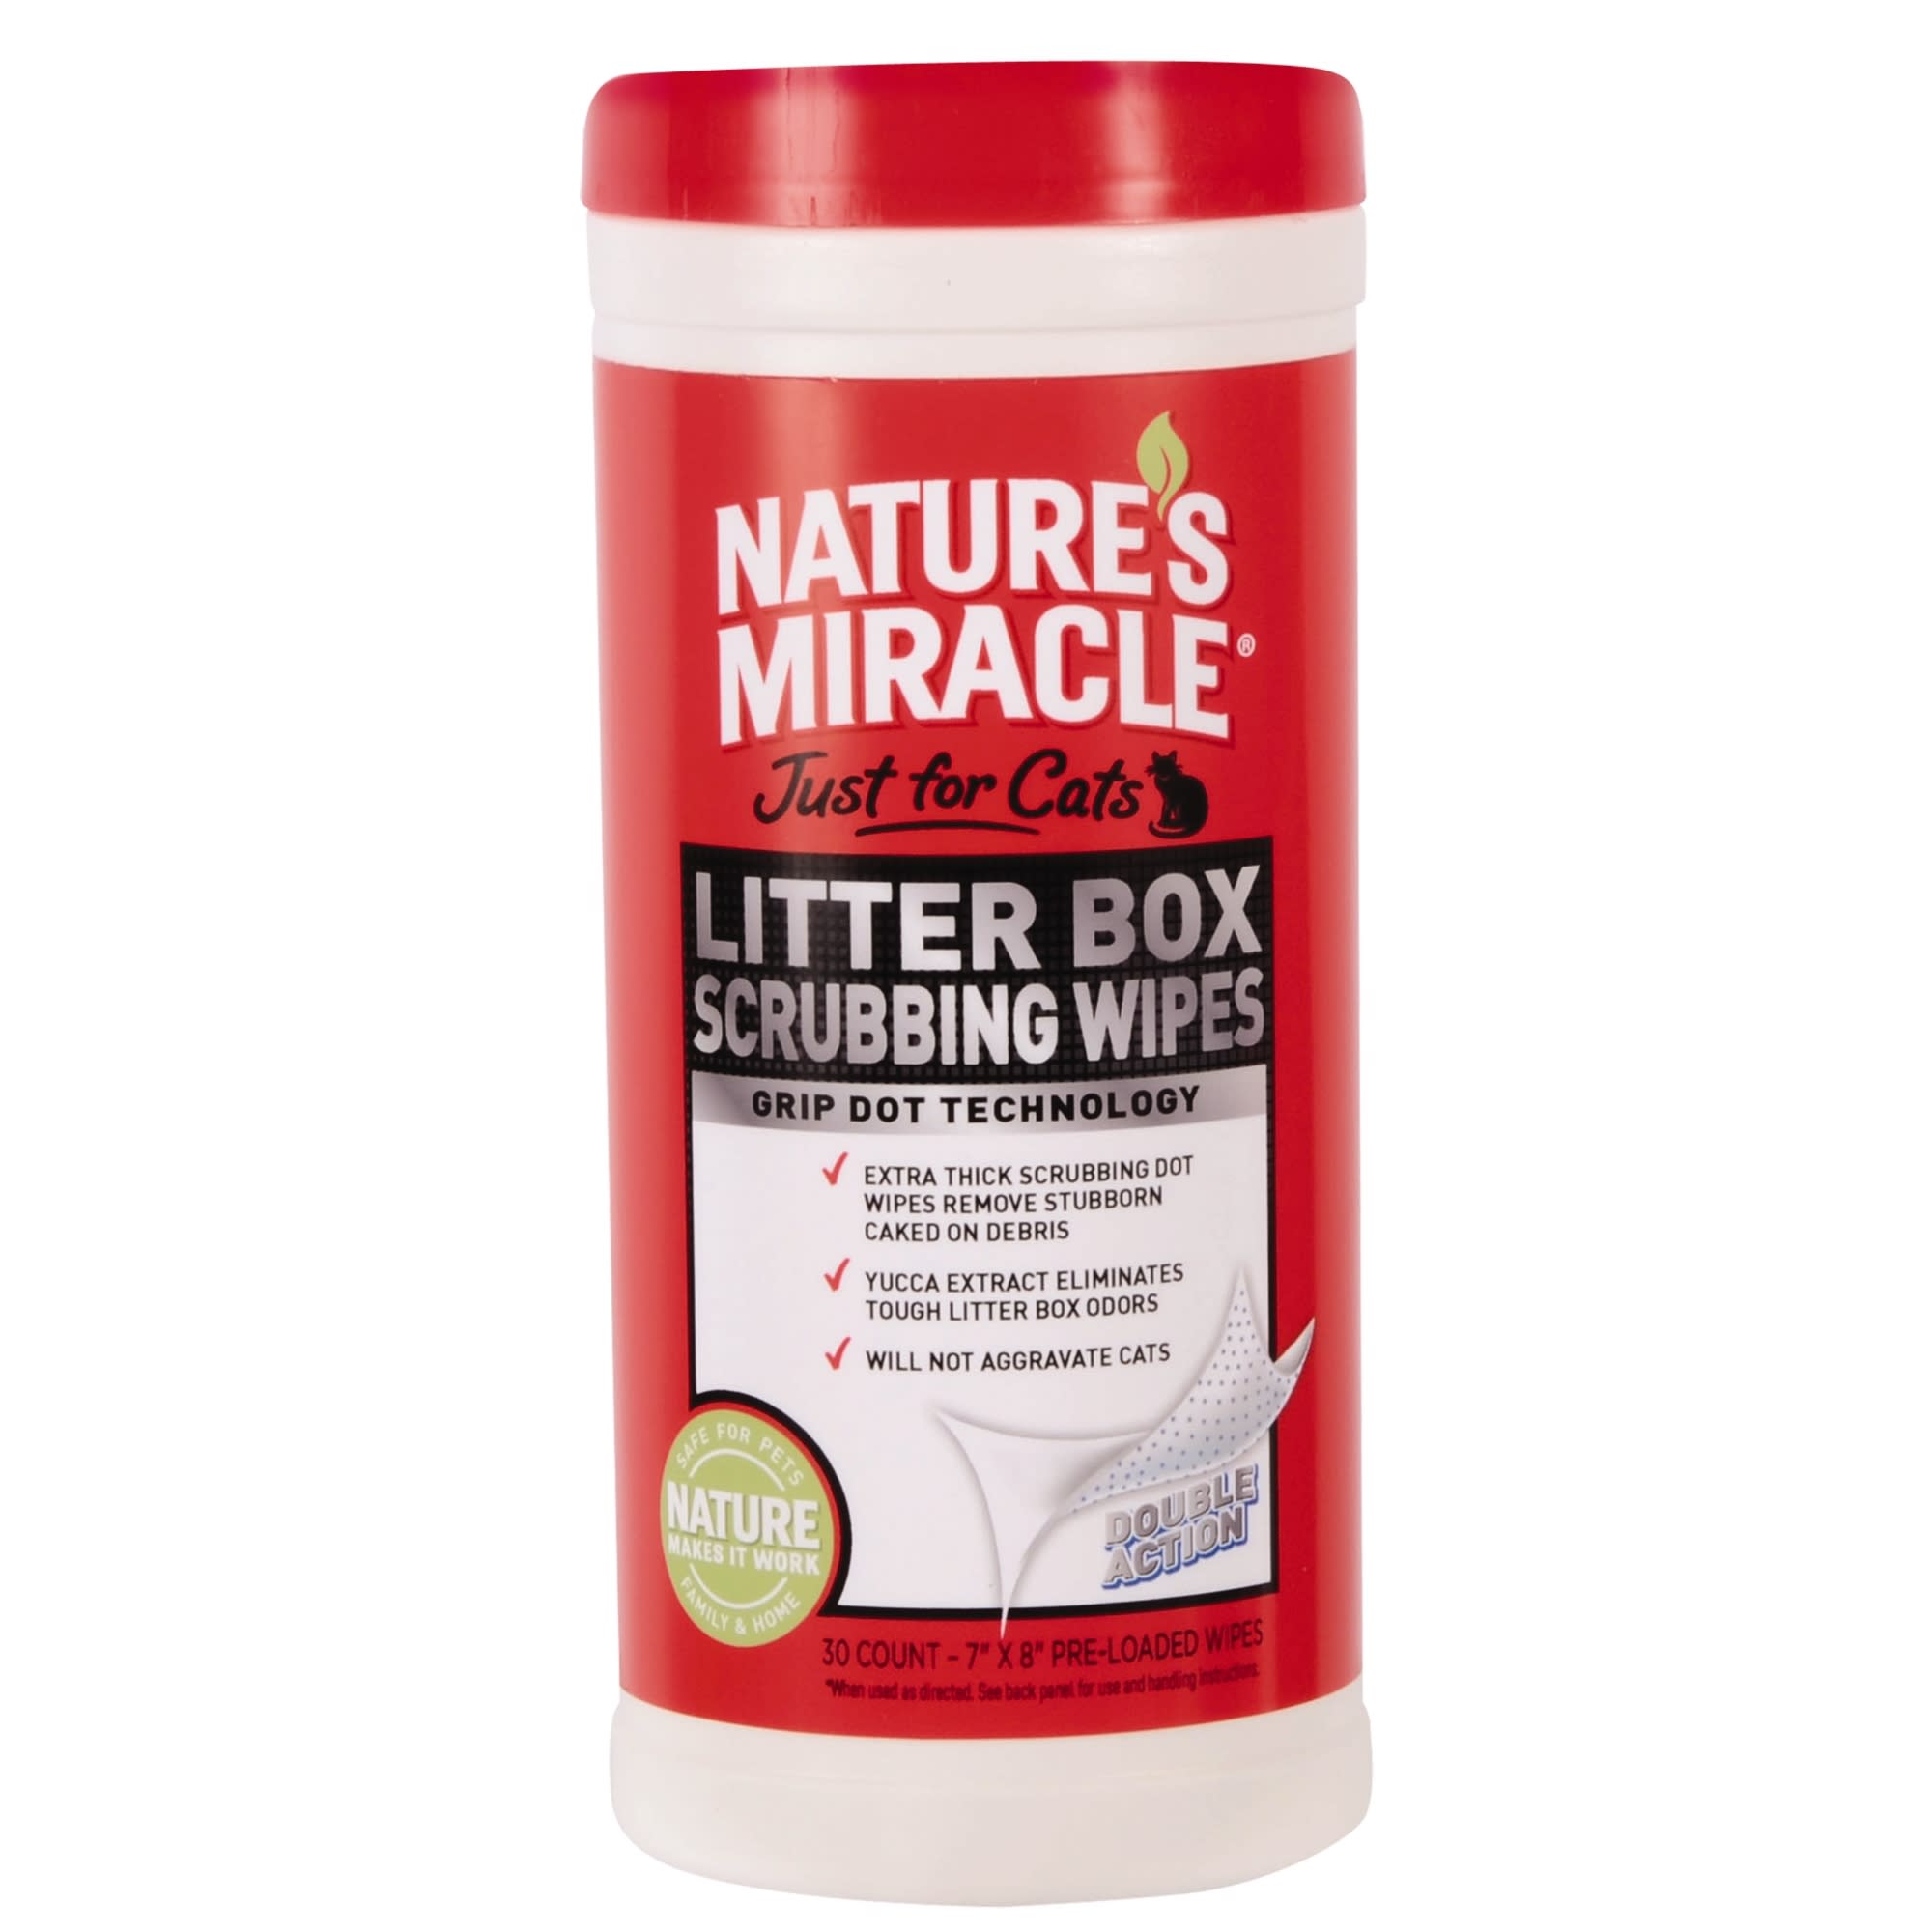 Miracle Litter Box Scrubbing Wipes 